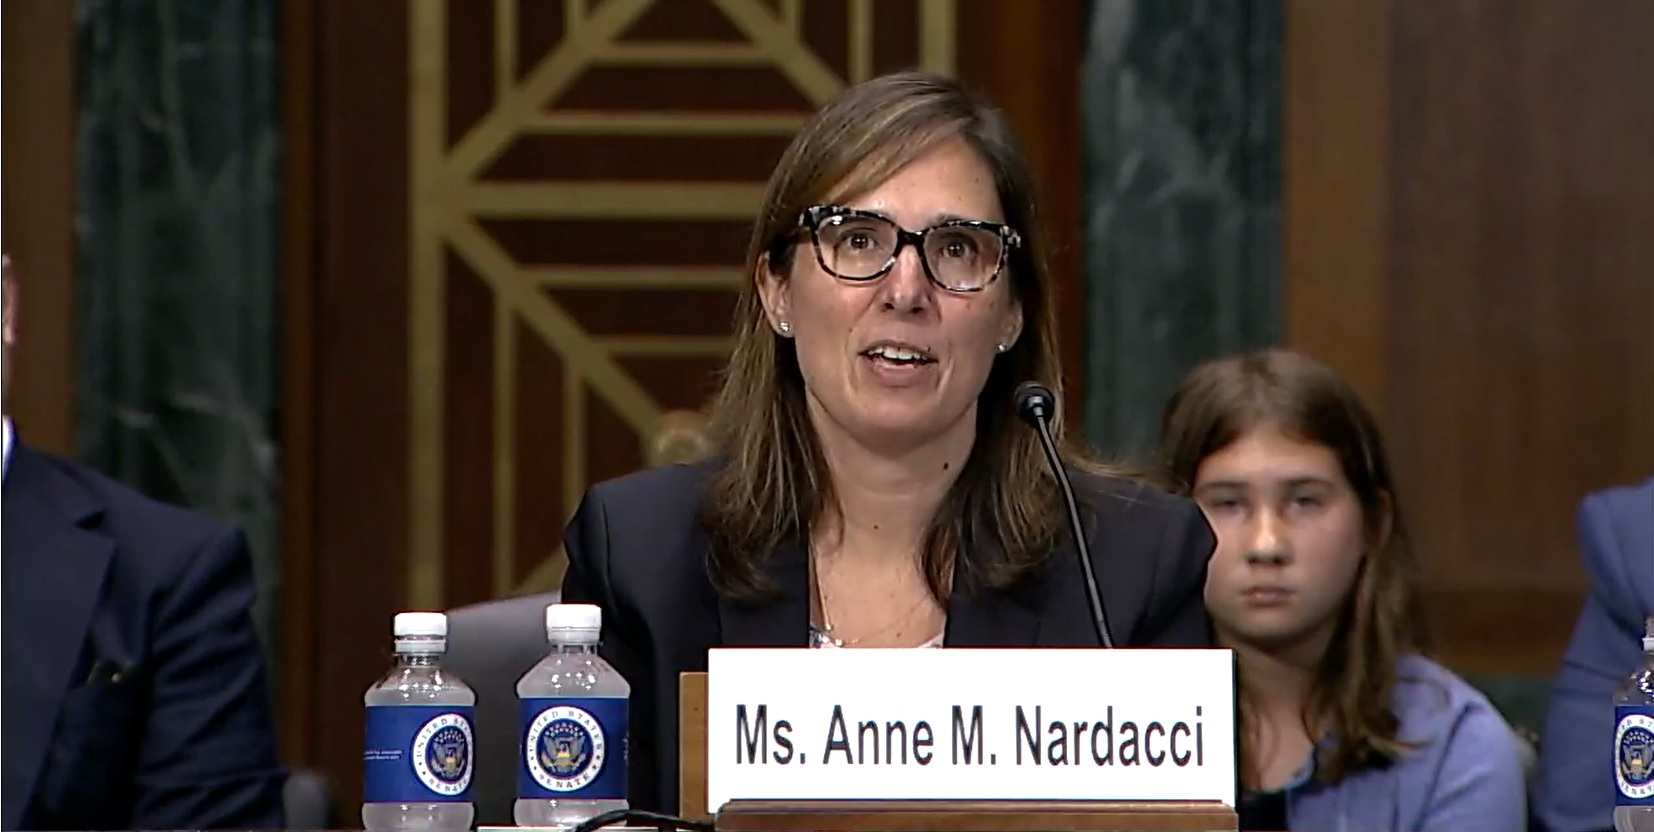 Anne Nardacci, a nominee to serve as a federal judge in the U.S. District Court for the Northern District of New York